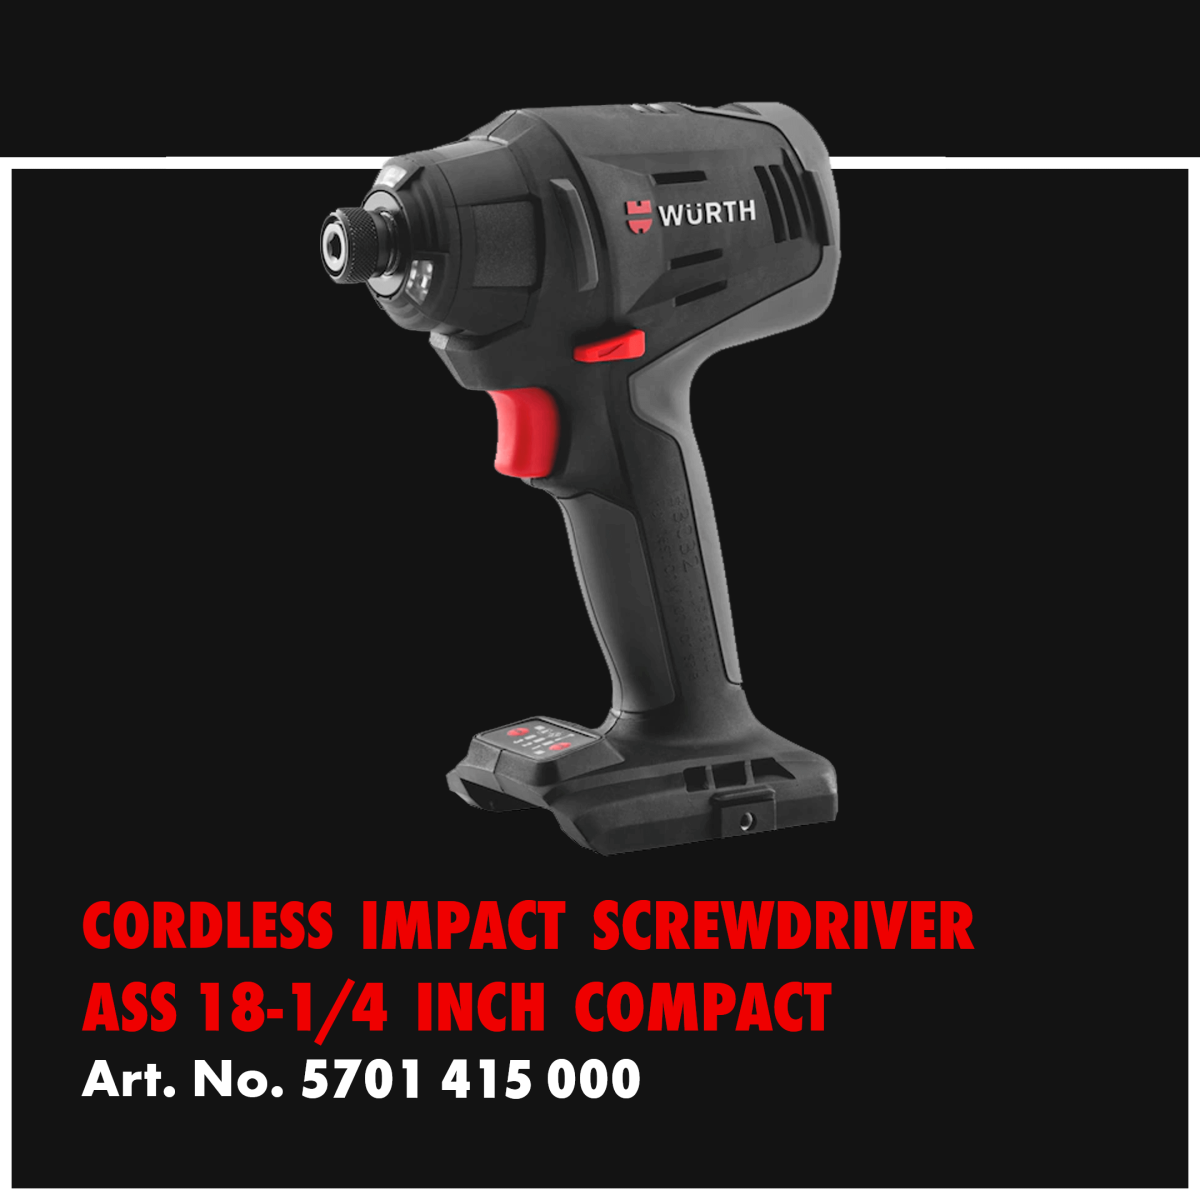 Cordless Impact Screwdriver ASS 18-1/4 Inch Compact